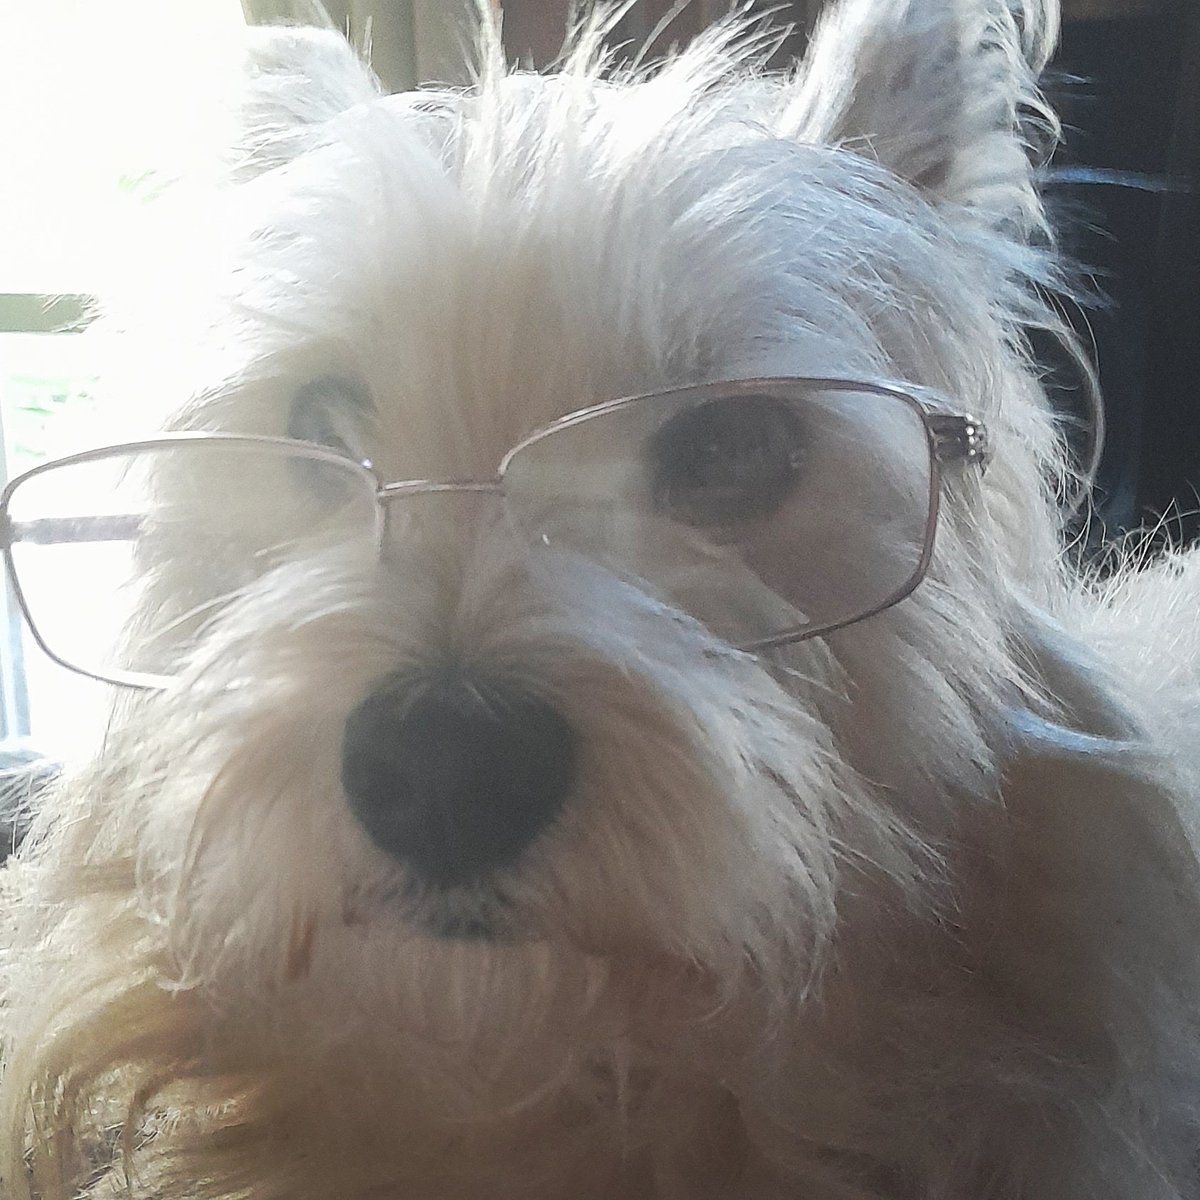 Who is doing #NaNoWriMo this year?
What are you working on?

I've been developmental editing chapter outlines for NaNo. 

Miss Sagequill has been assisting.
#westhighlandwhiteterrier
#westitude

#6amwriters #WritingCommunity #NaNoWriMo23